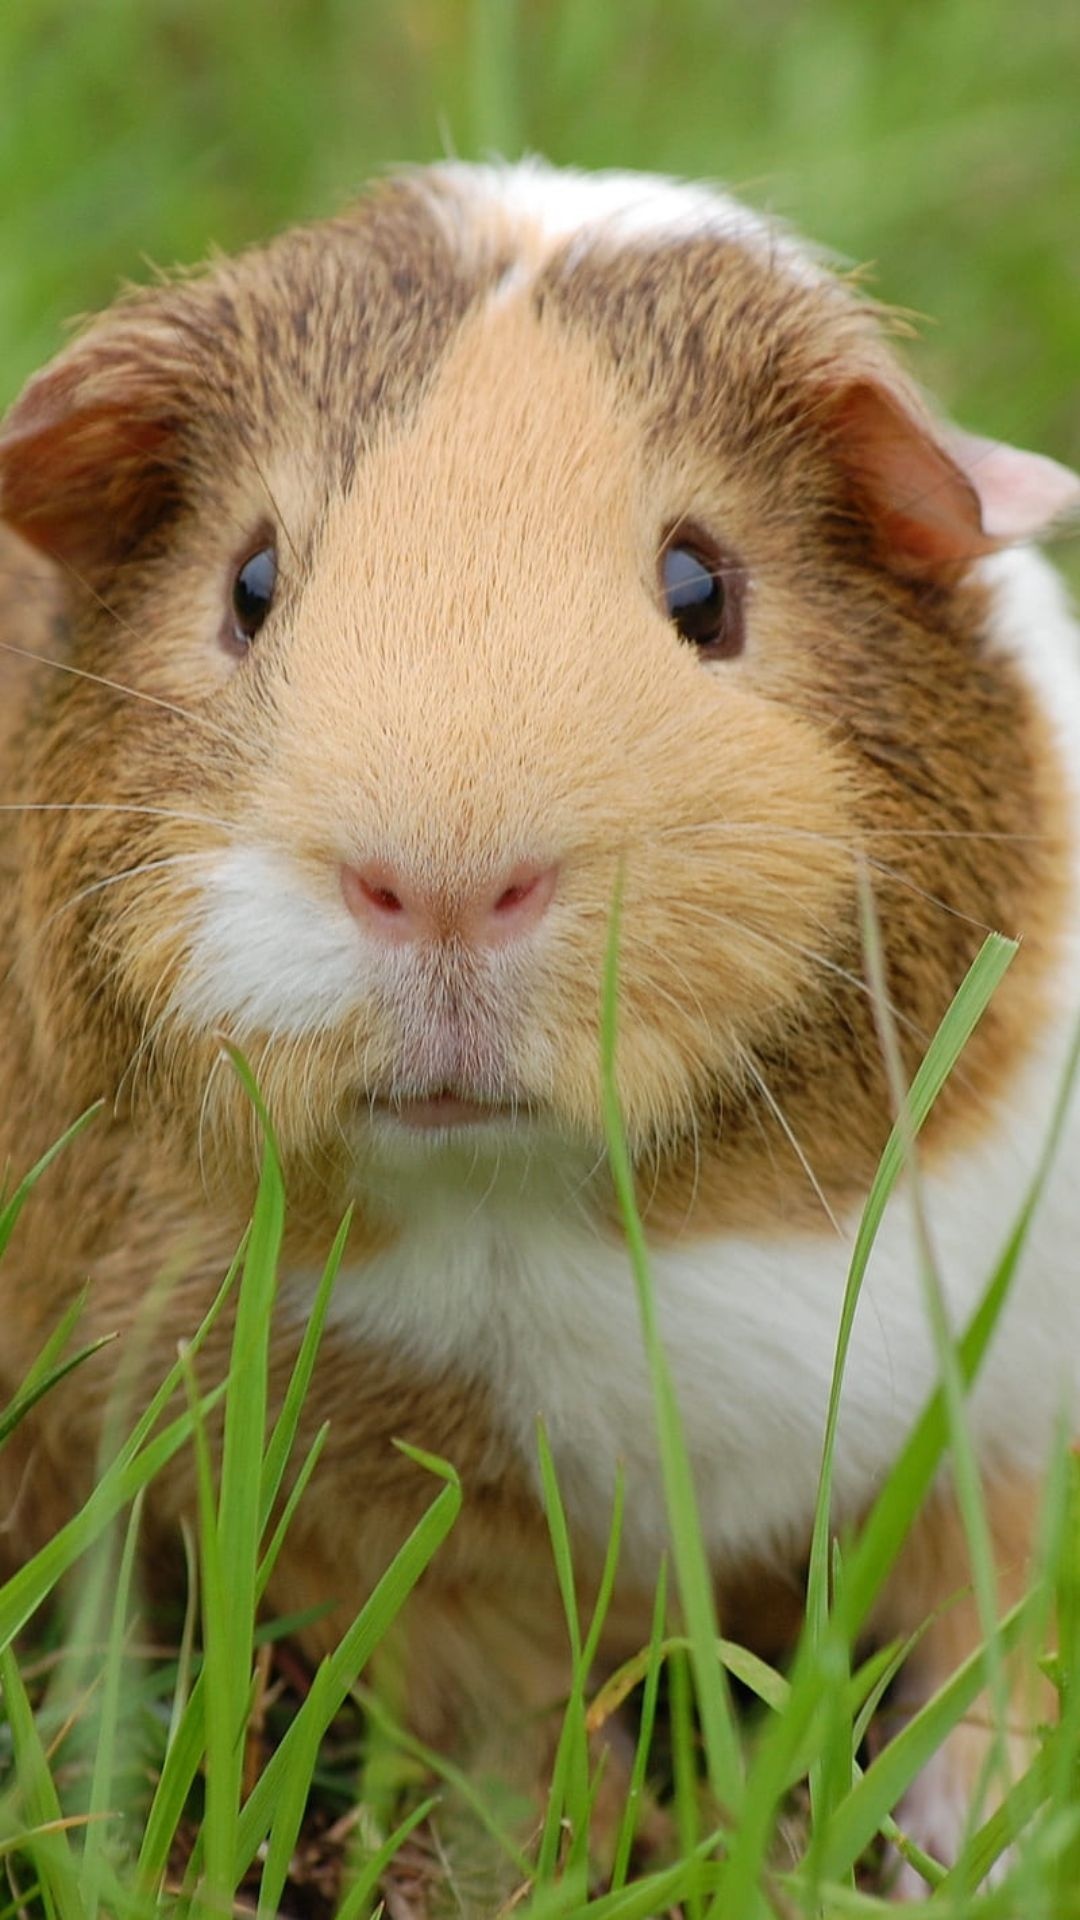 Guinea pig images, Cute guinea pig wallpapers, Adorable pet pictures, Furry companions, 1080x1920 Full HD Handy